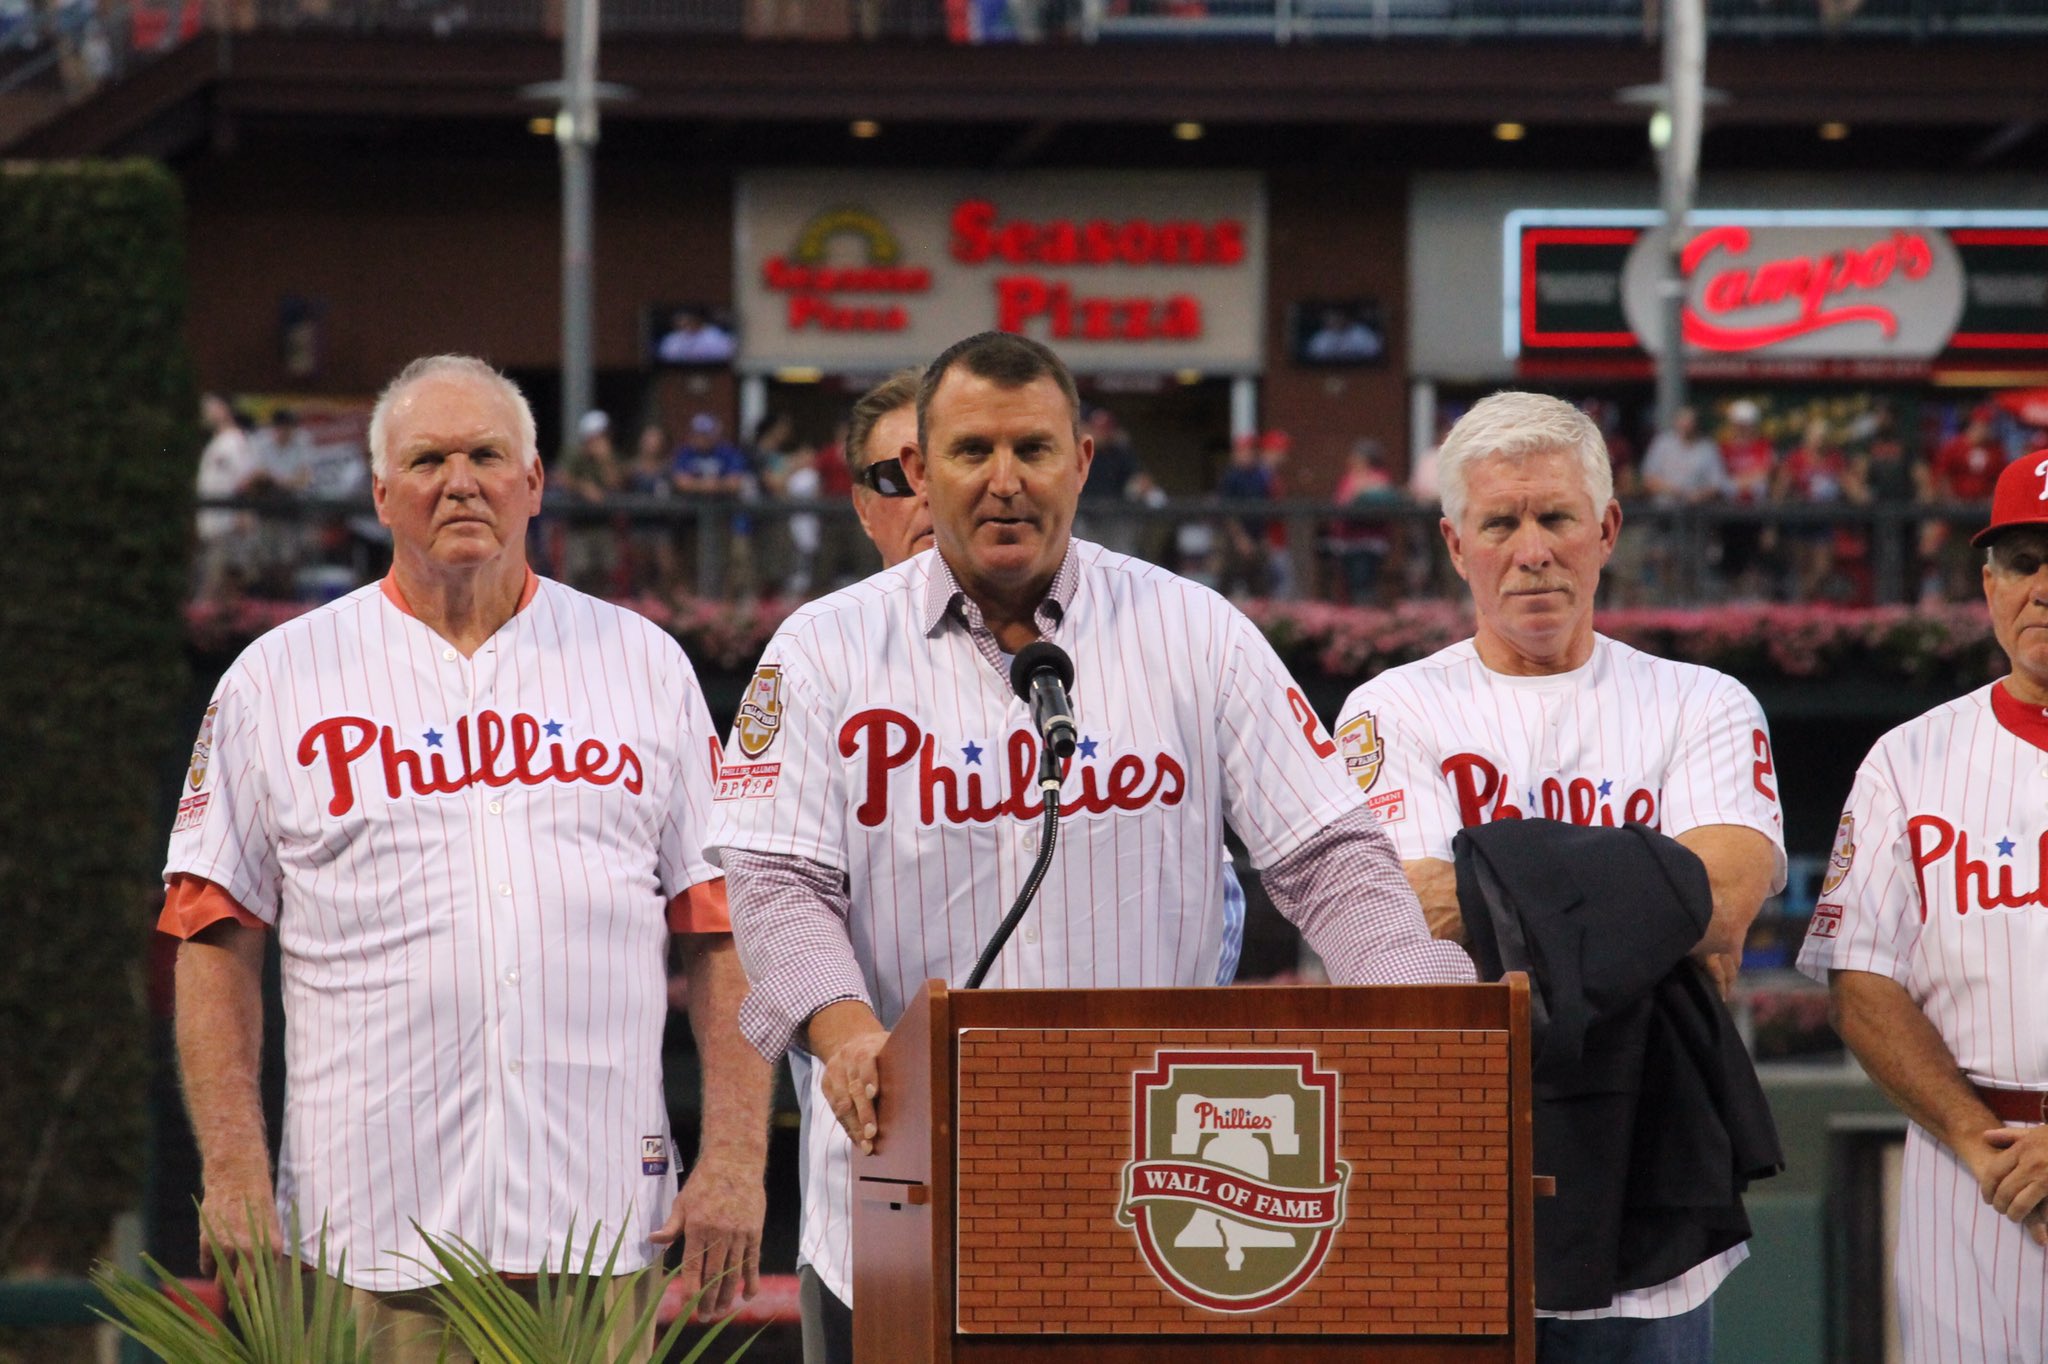 Philadelphia Phillies on X: ICYMI, Jim Thome was inducted into